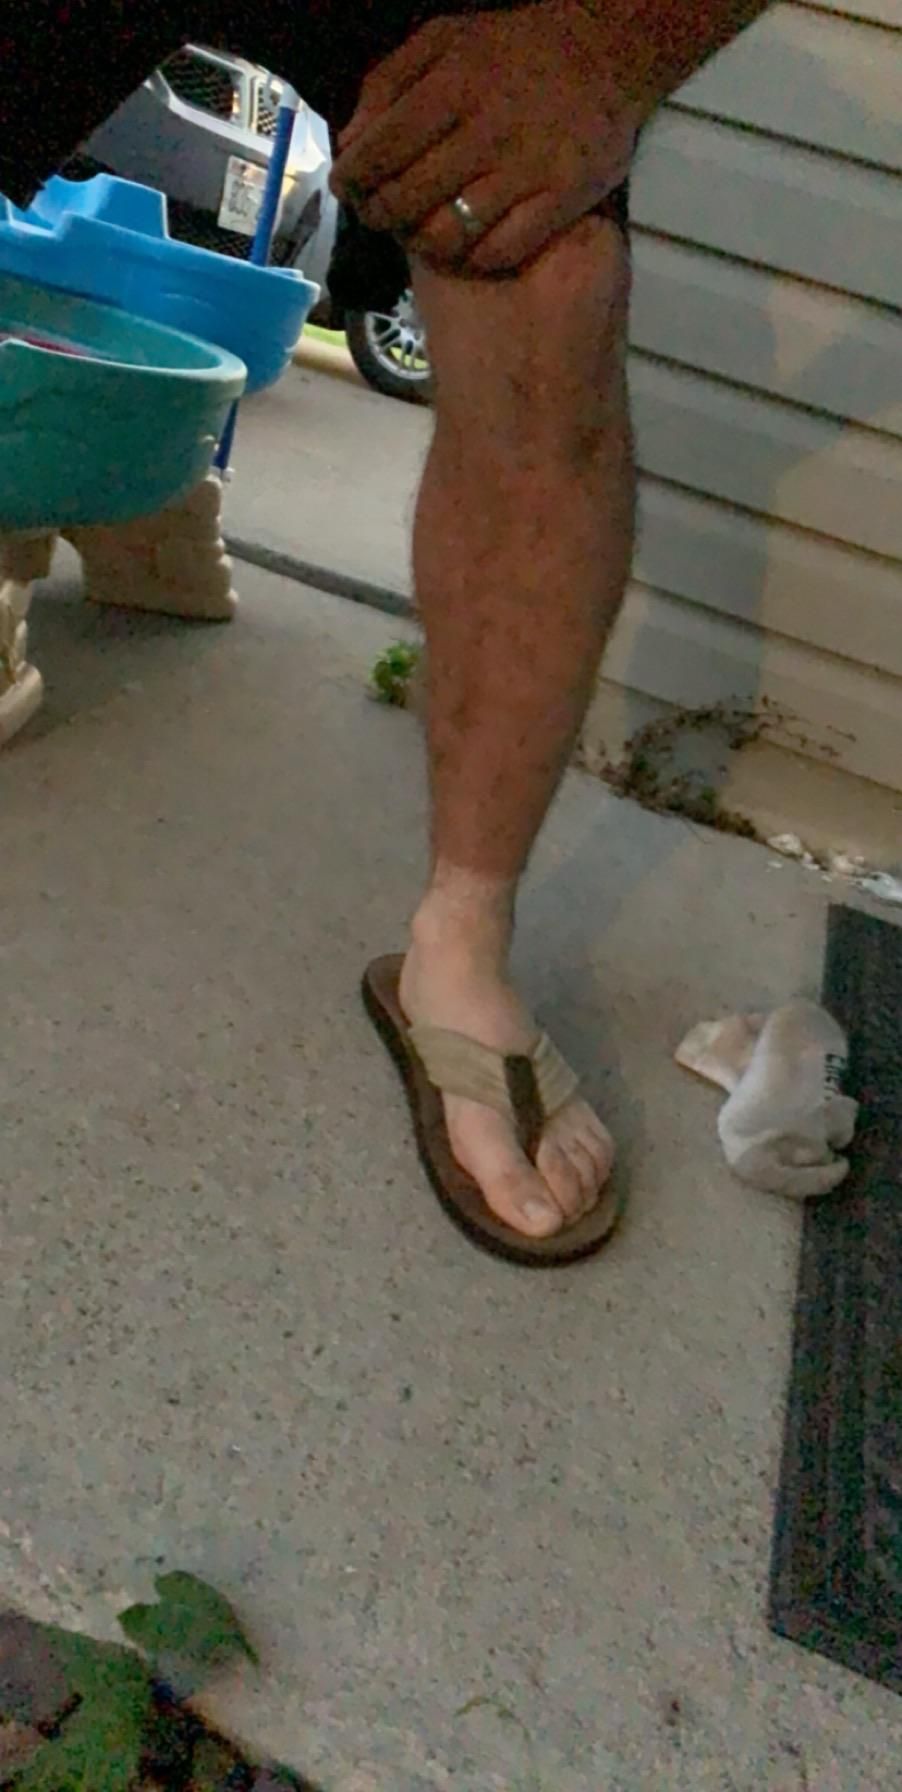 My husbands first time wearing sandals since starting his new asphalt job...